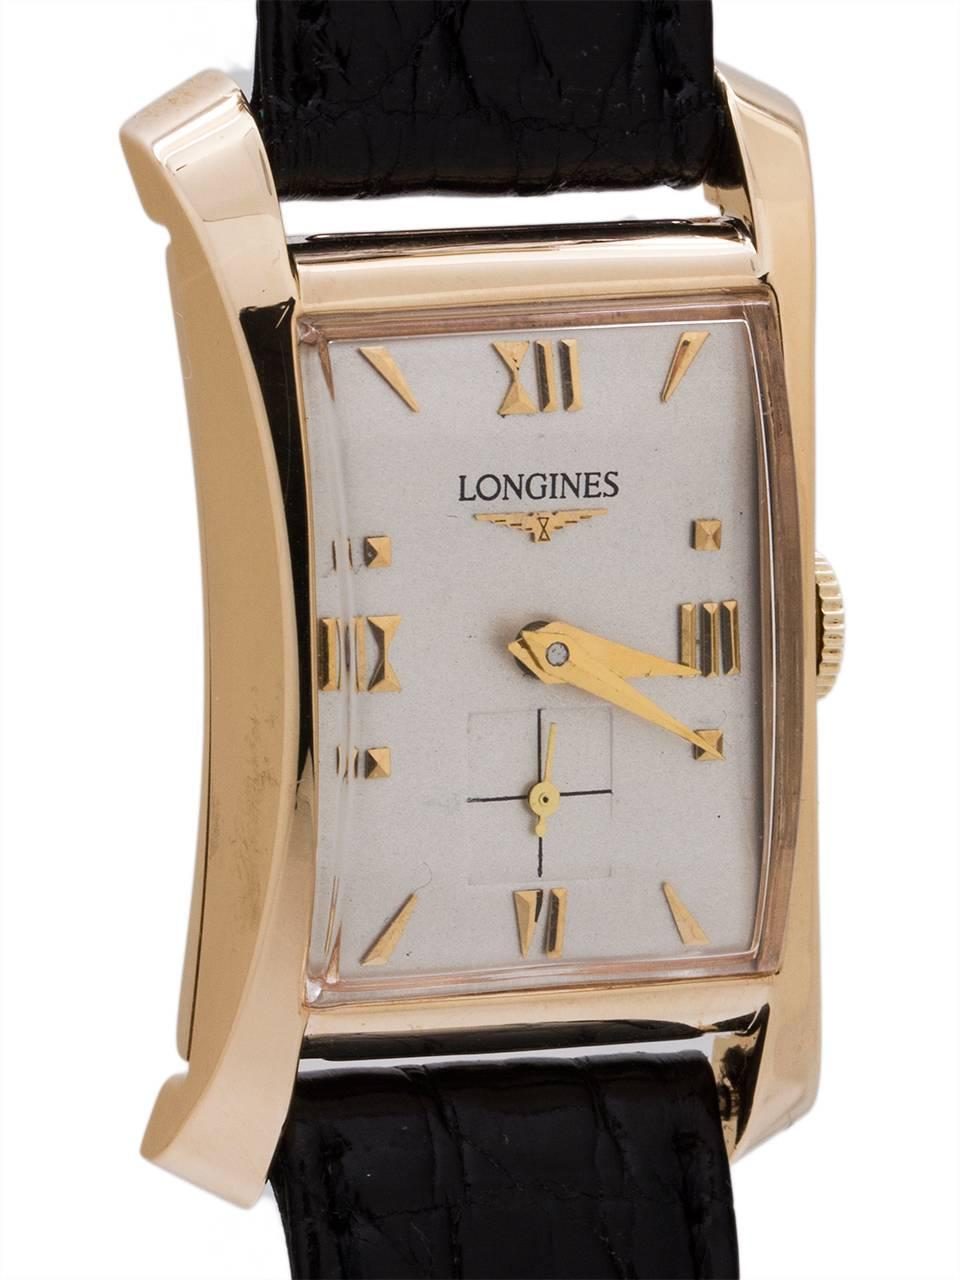 An especially stylish Longines 14K YG “moderne” Hourglass model 25 X 40 mm circa 1950’s. Stunning design model with great looking profile flared case, nicely restored silvered satin dial with gold applied indexes and tapered gilt hands. Note the 1/4